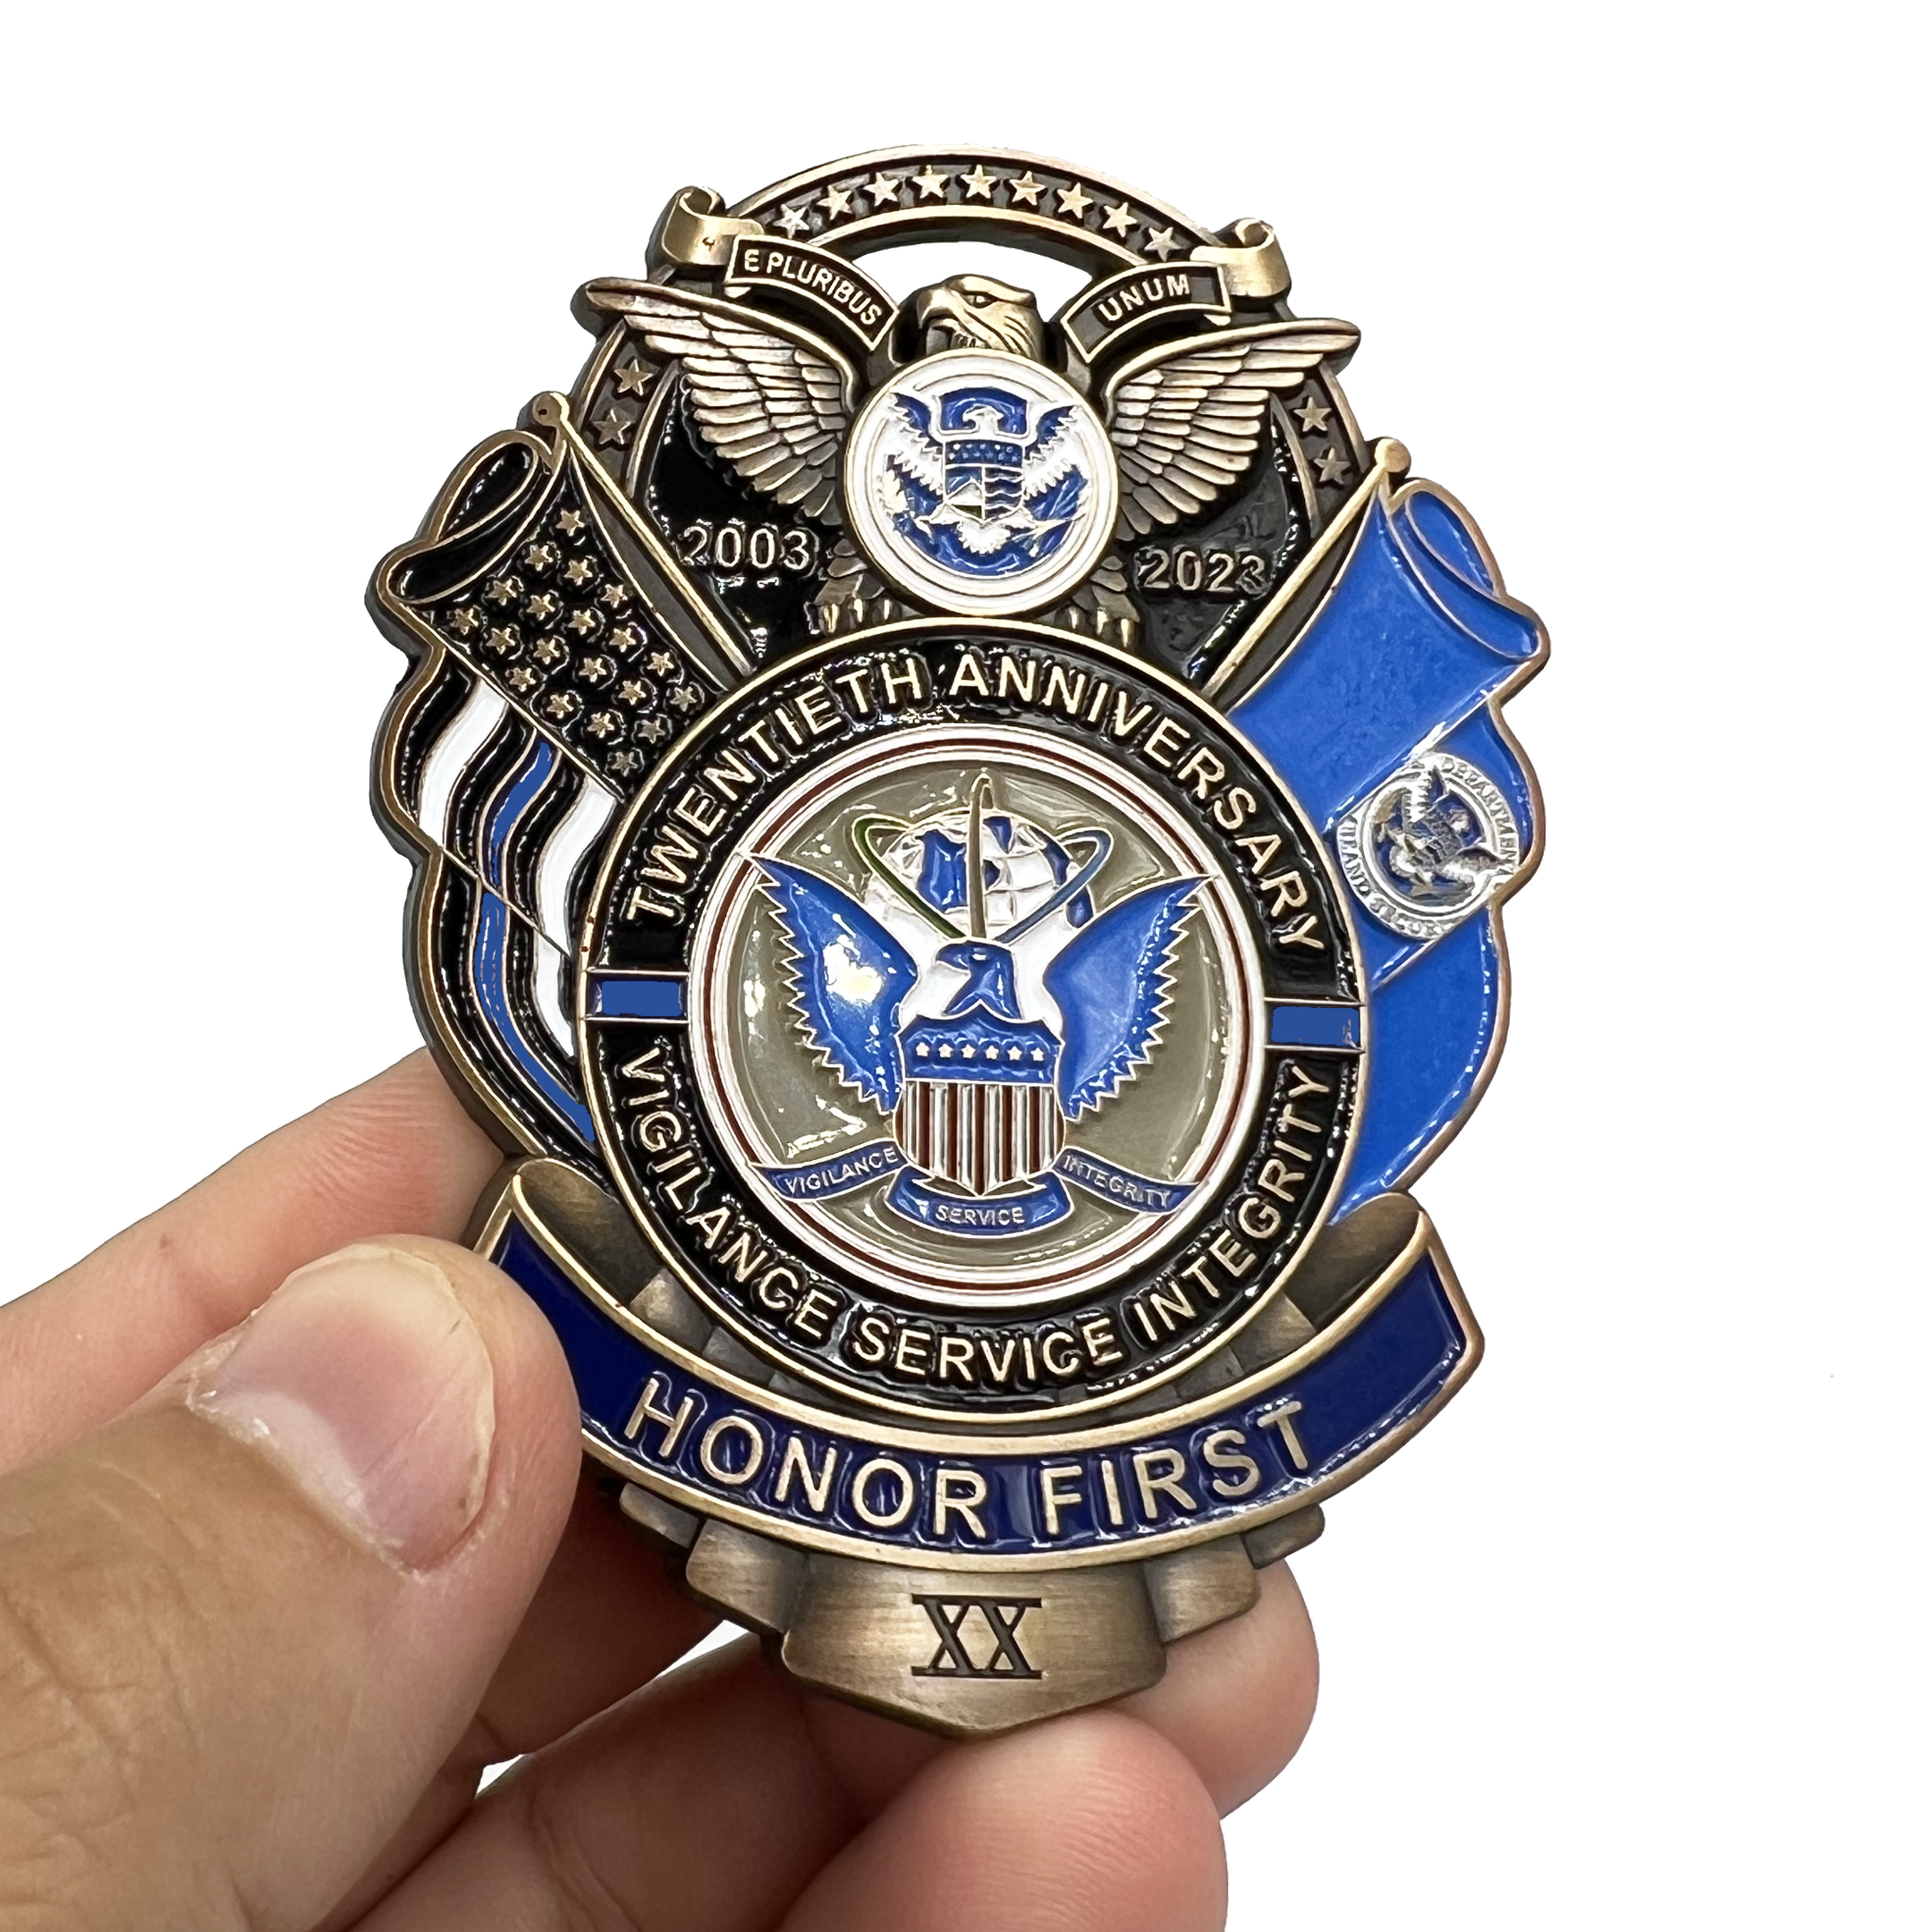 CL3-07 Large 3 inch 20th Anniversary CBP CBP Officer Field Ops Commemorative Honor First Thin Blue Line Pin not a Challenge Coin